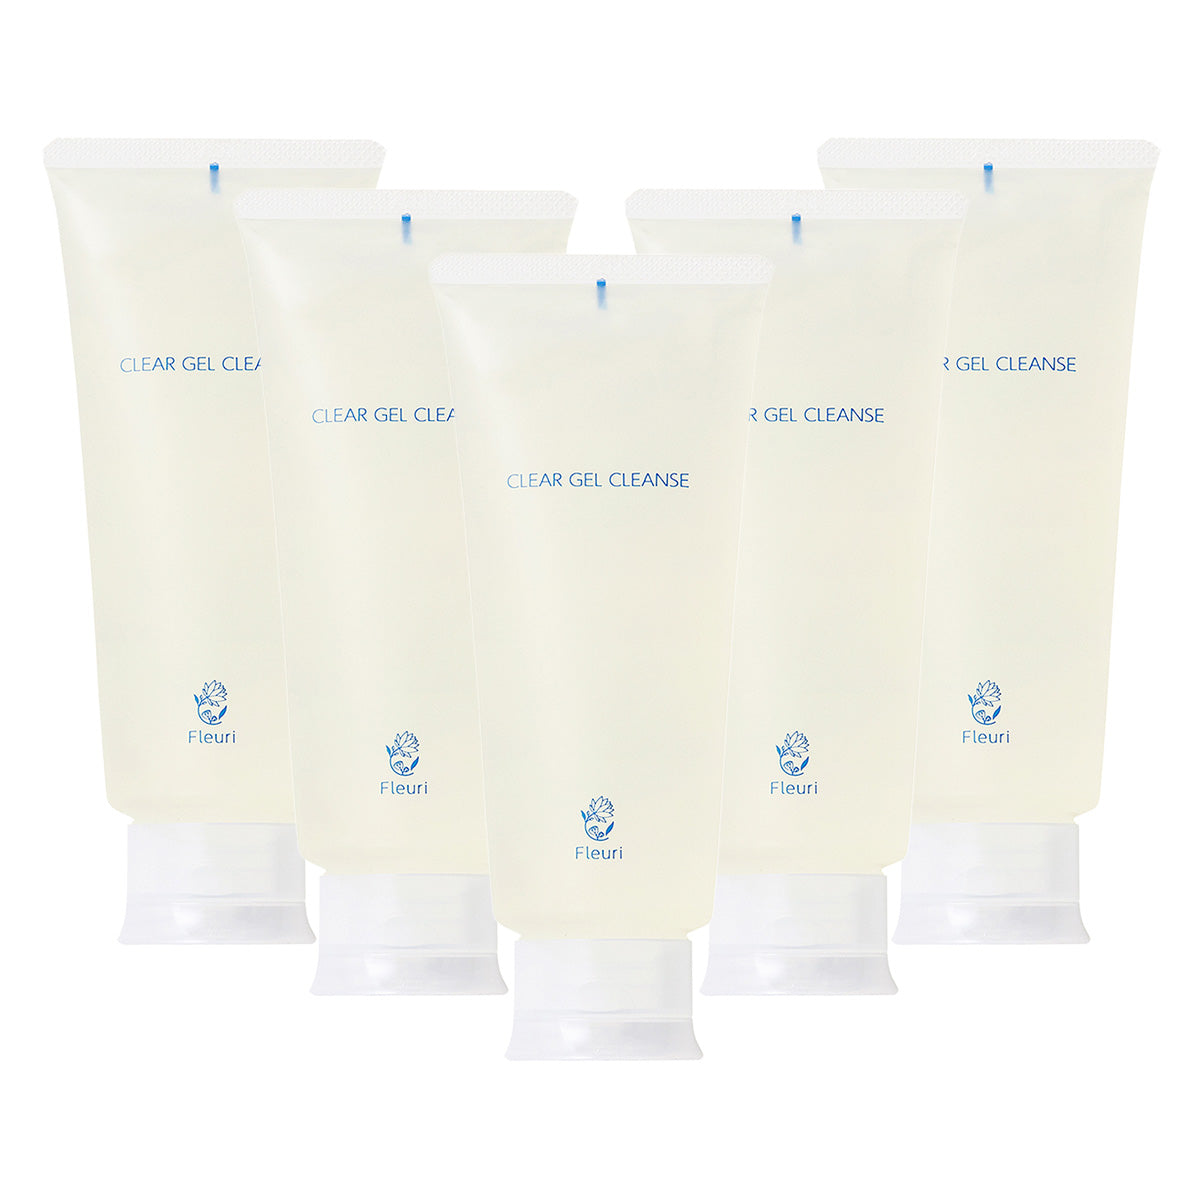 CLEAR GEL CLEANSE (5PCS) for 5 MONTHS -Gentle Makeup Remover-